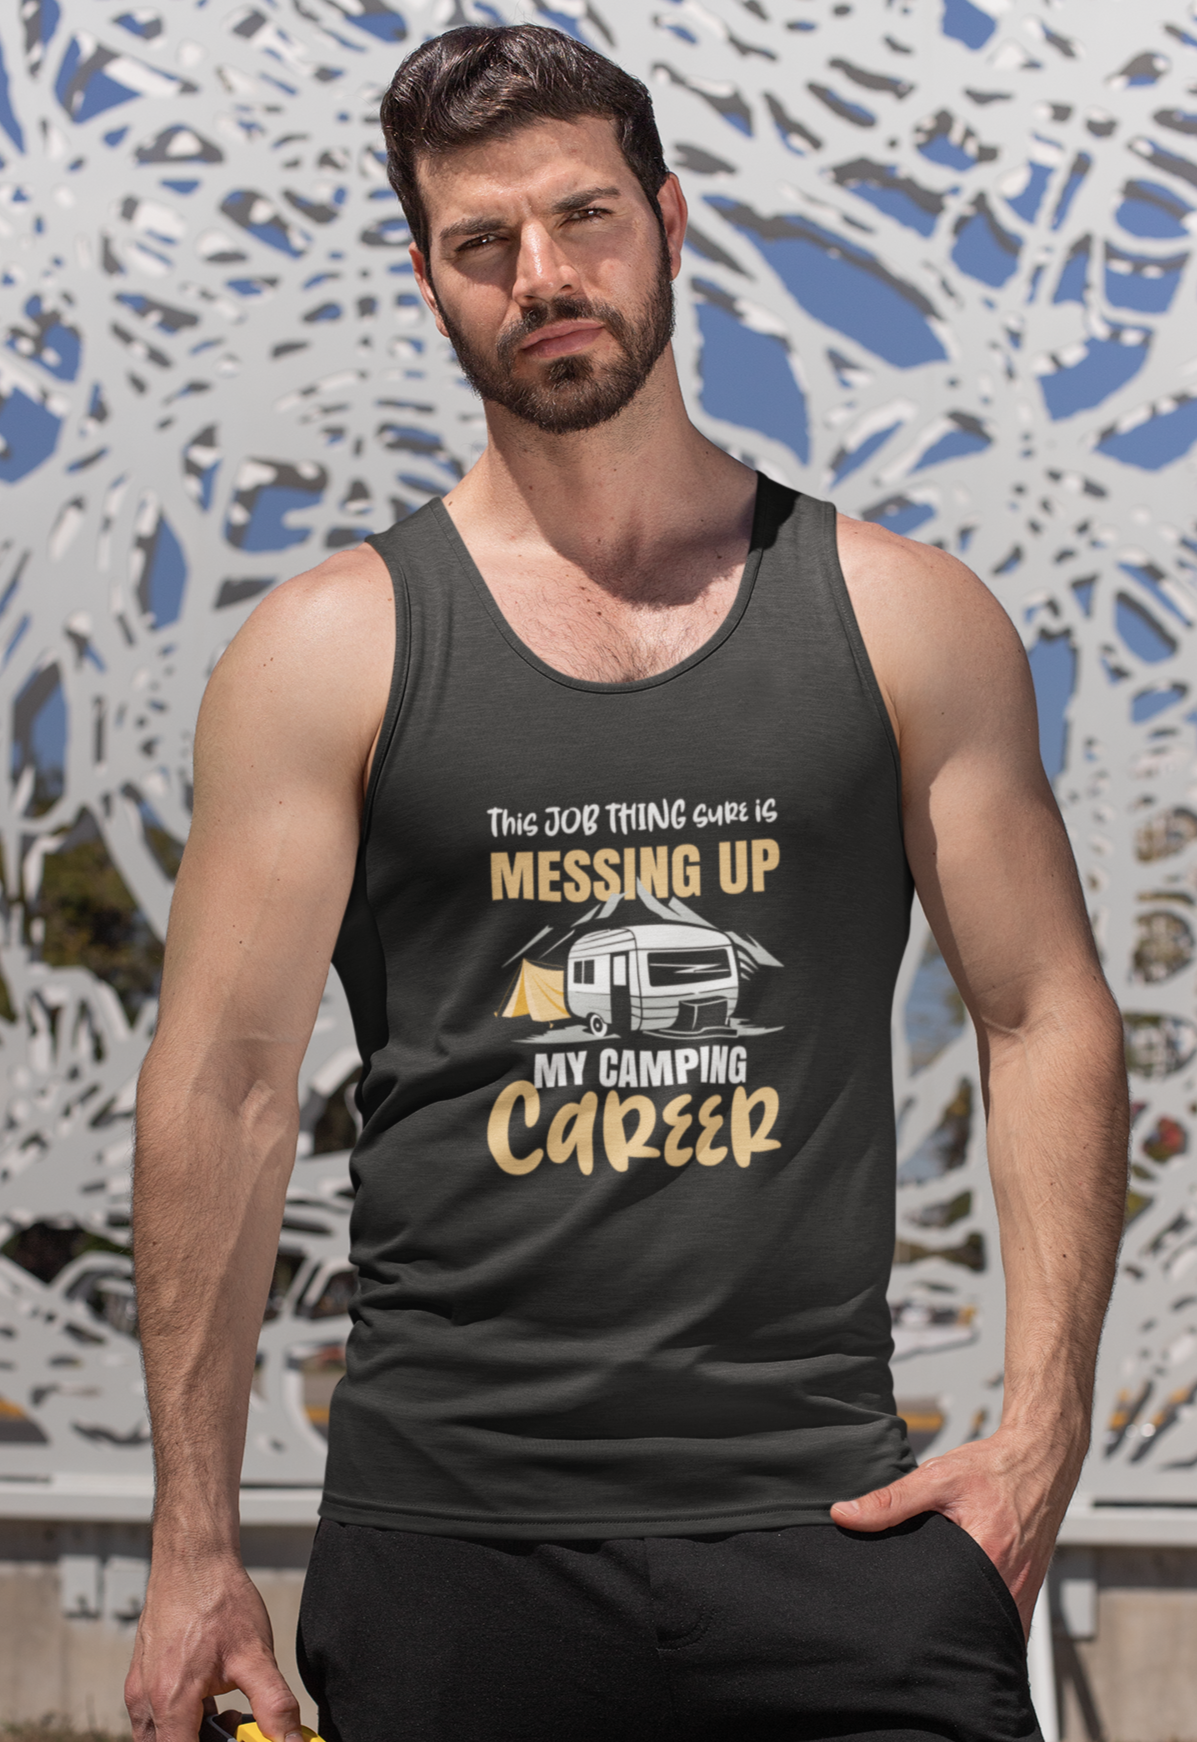 Job messes up camping; Soft 100% cotton tank top. Removable tag for comfort